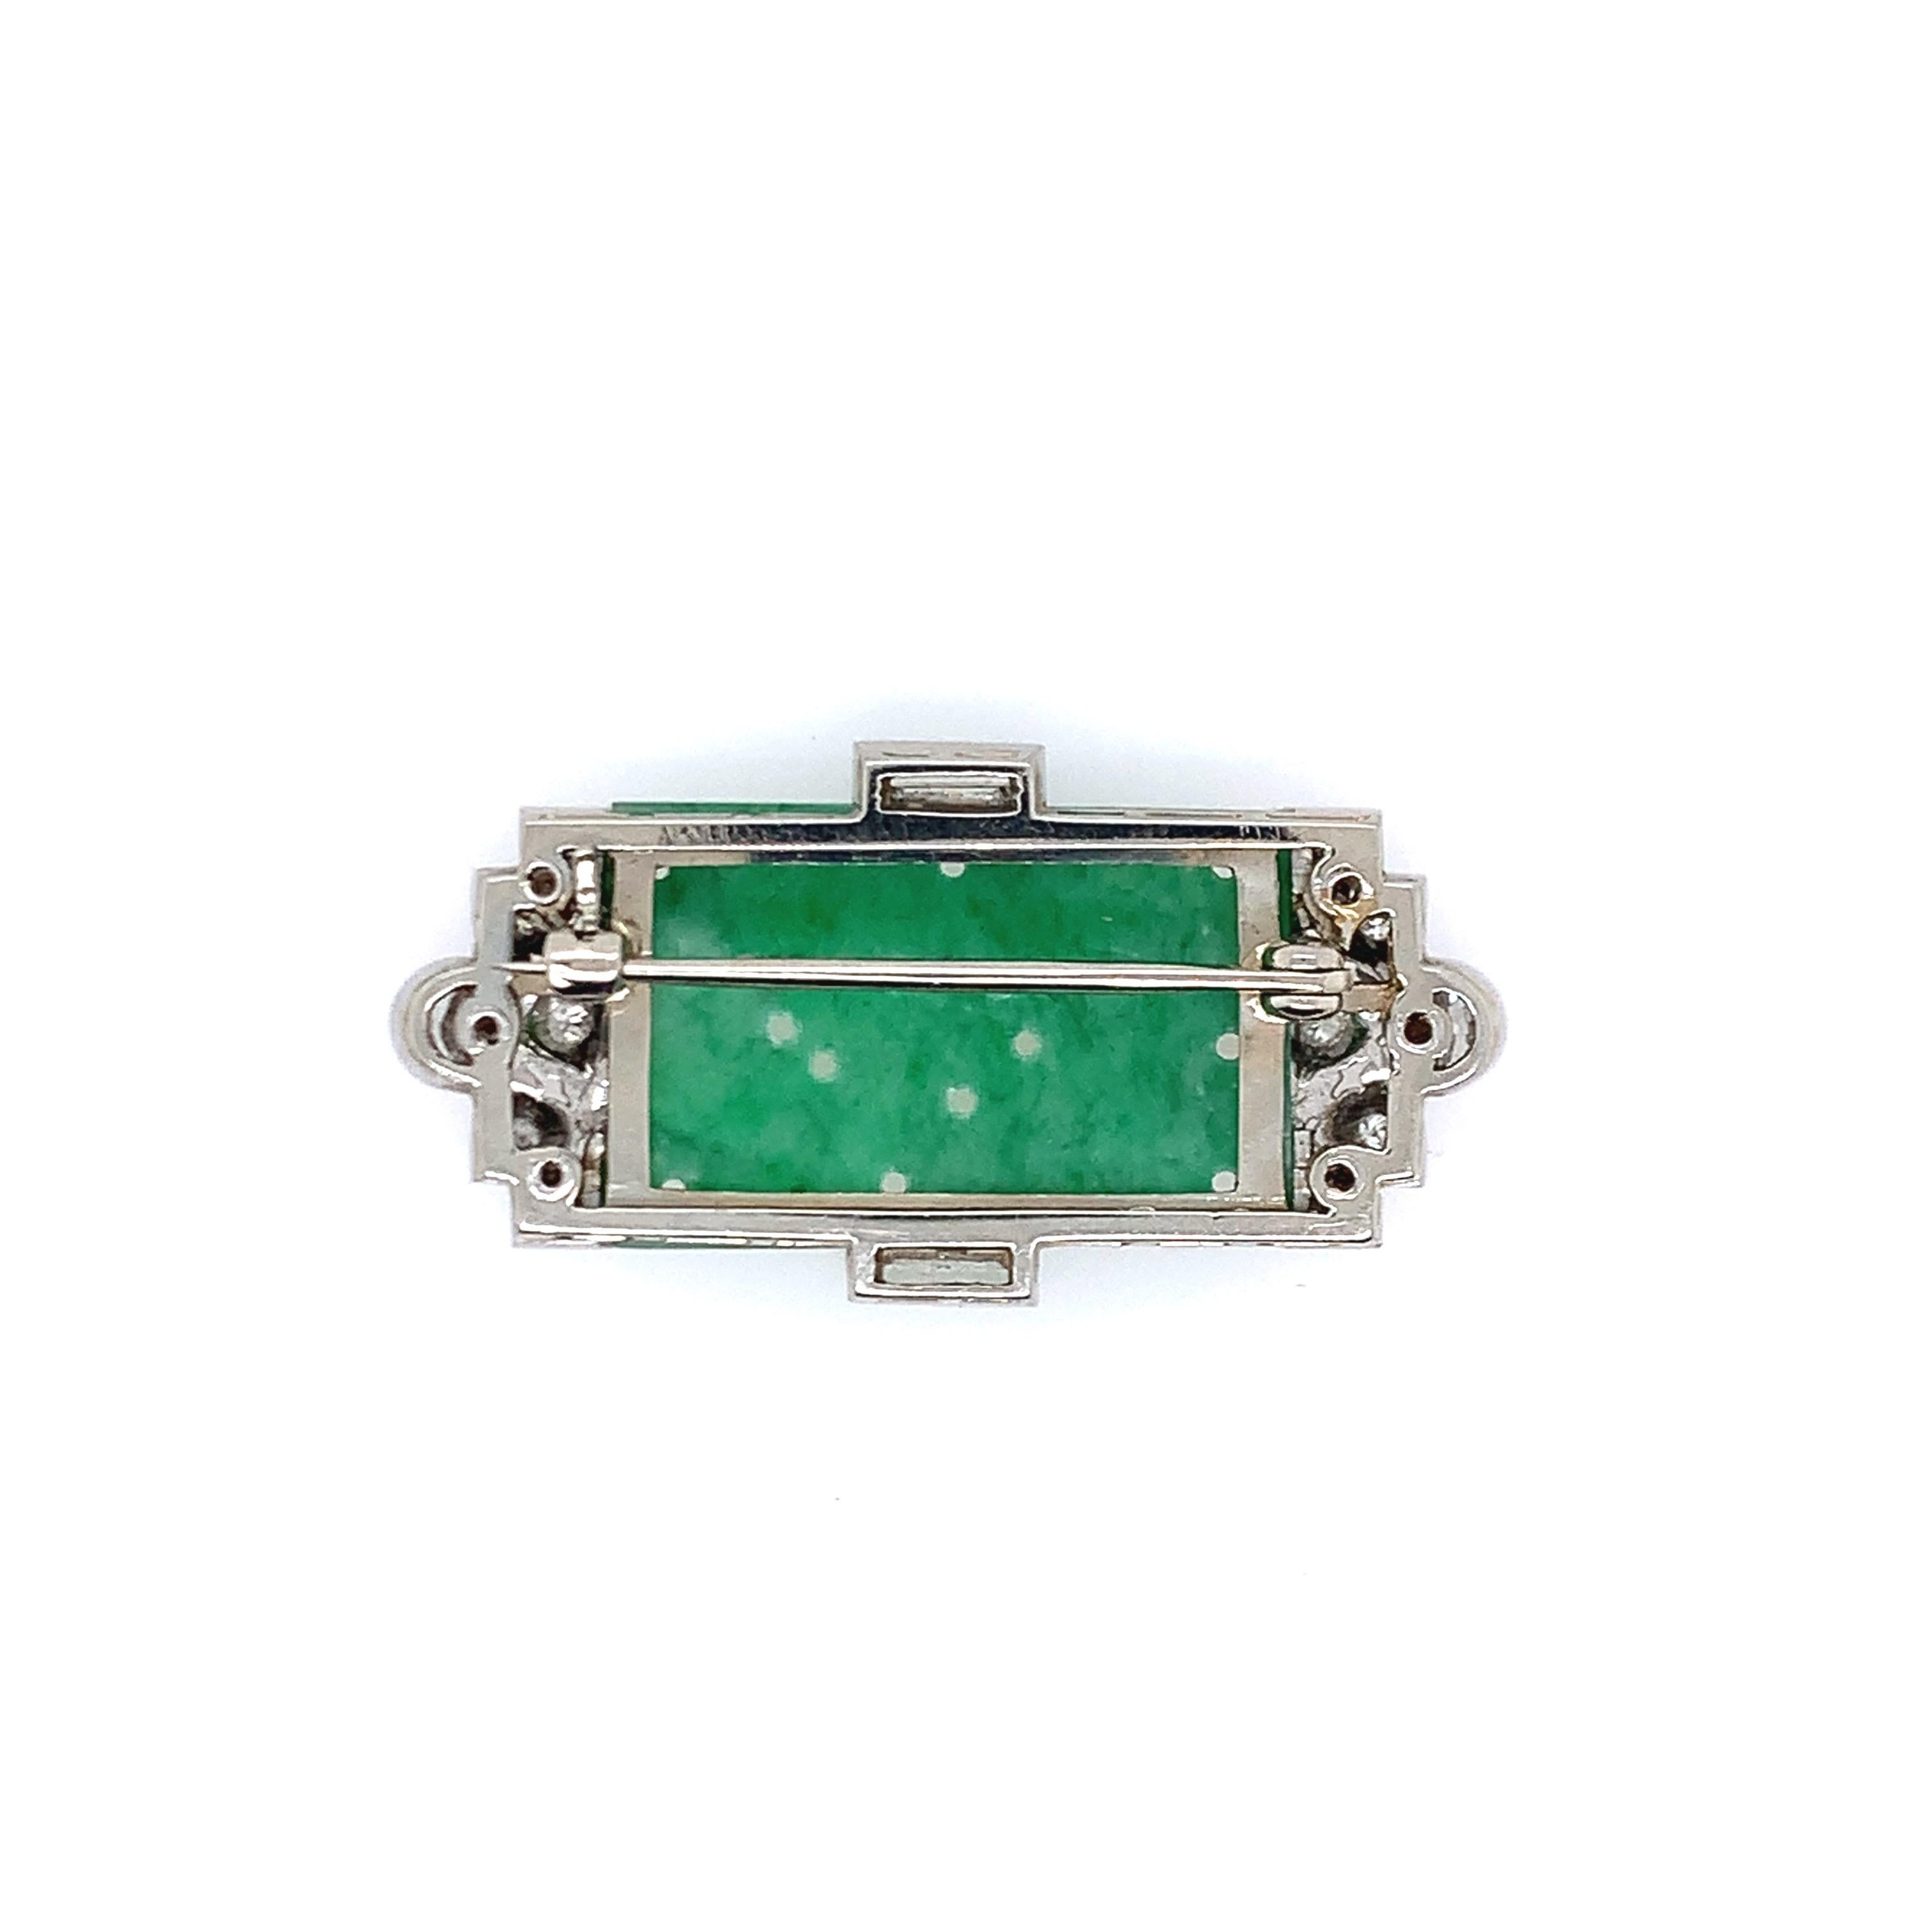 Set in platinum, this brooch consists of diamonds totaling 1 carat and natural, type A jade at its center. Created in the 1920s, this art deco brooch's length is 0.75 inch and its width is 1.5 inches. The total weight is 8.9 grams. 